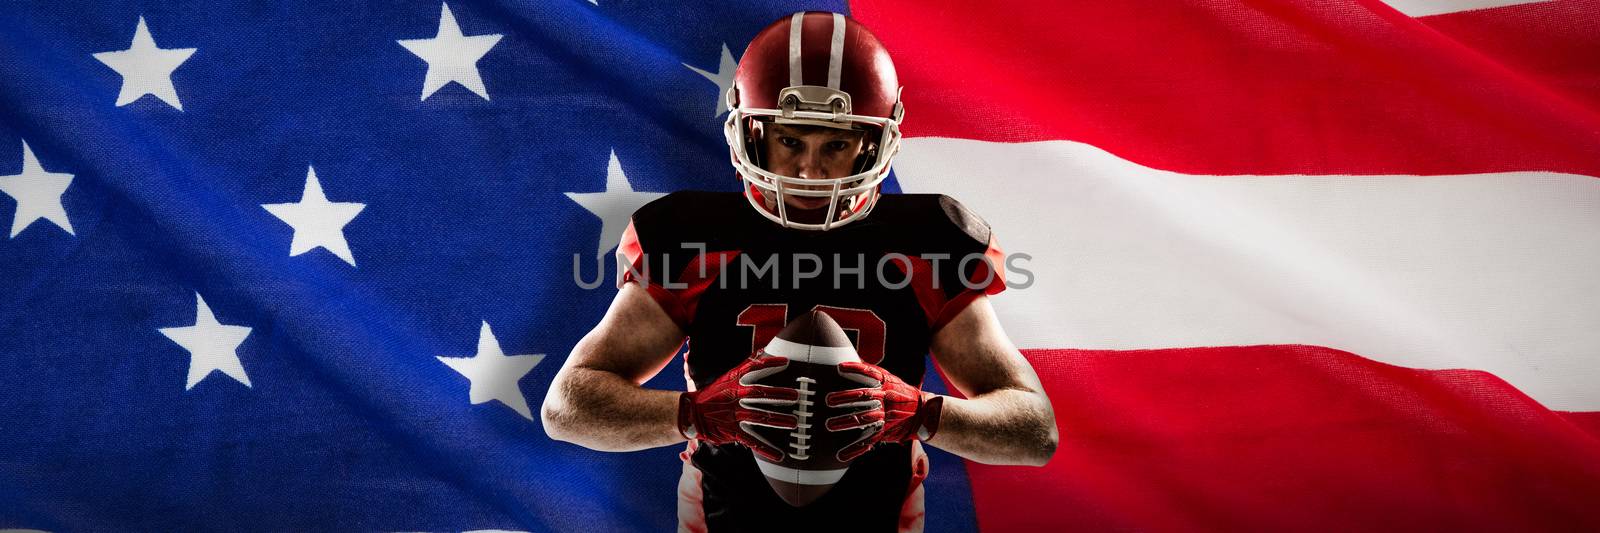 American football player standing with helmet and ball against close-up of an american flag